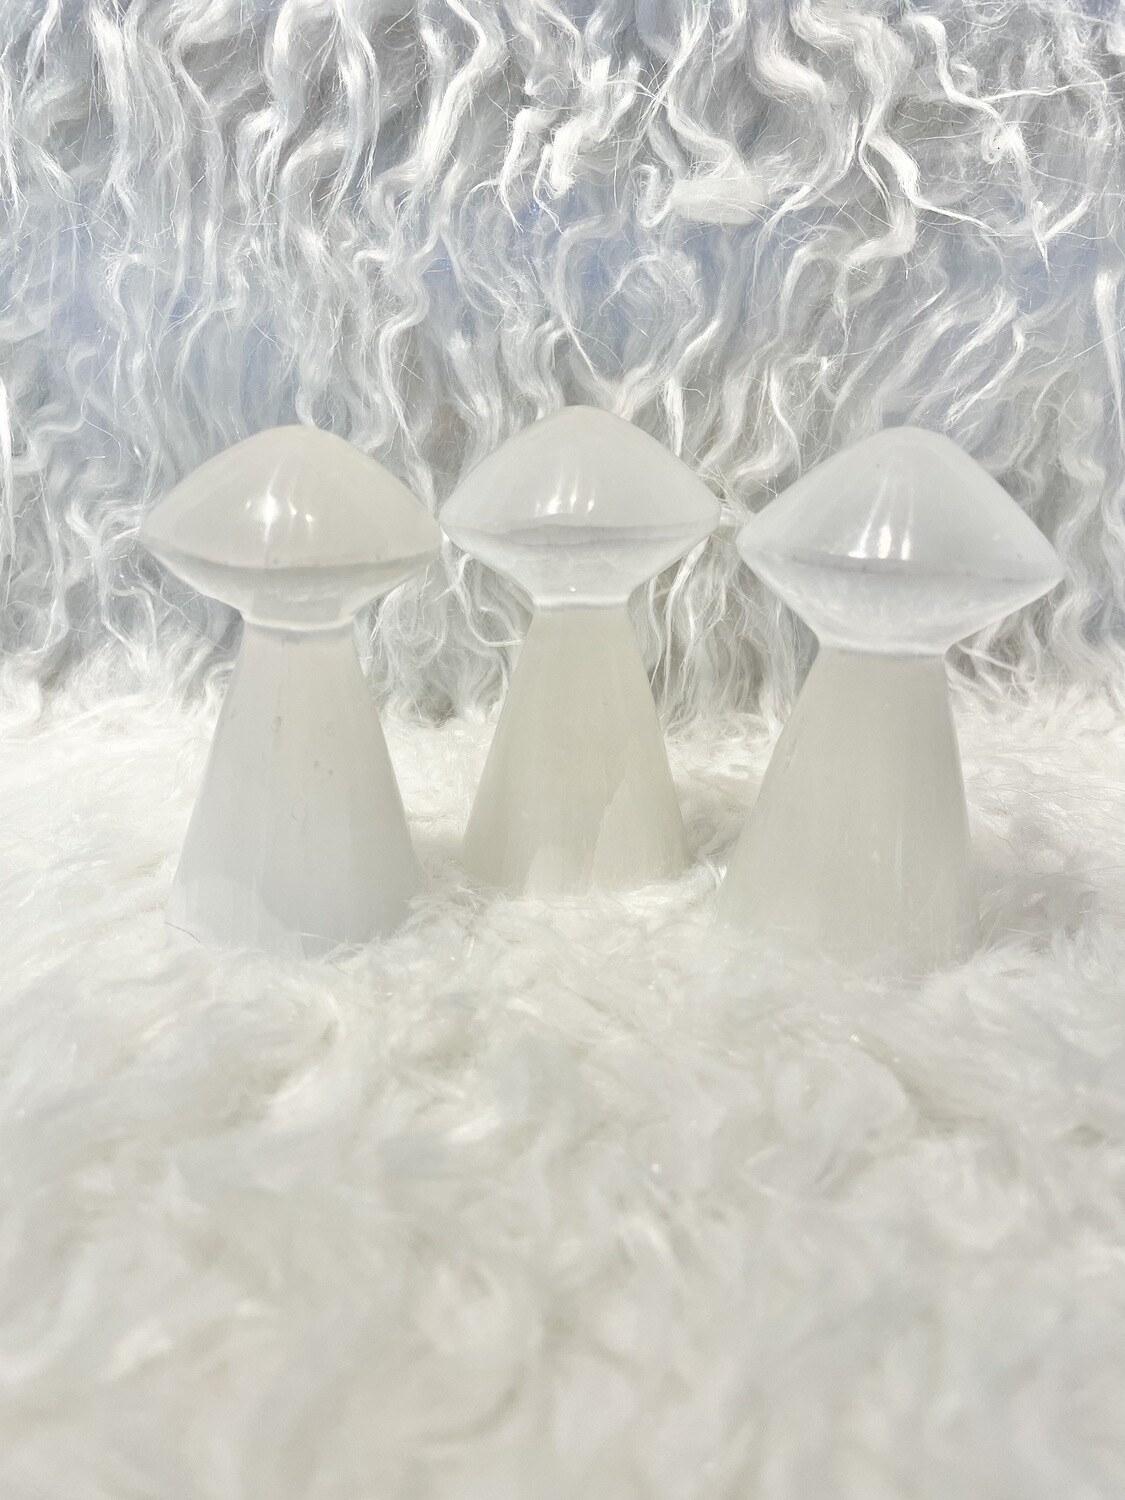 Snow Frosted Selenite Mushrooms